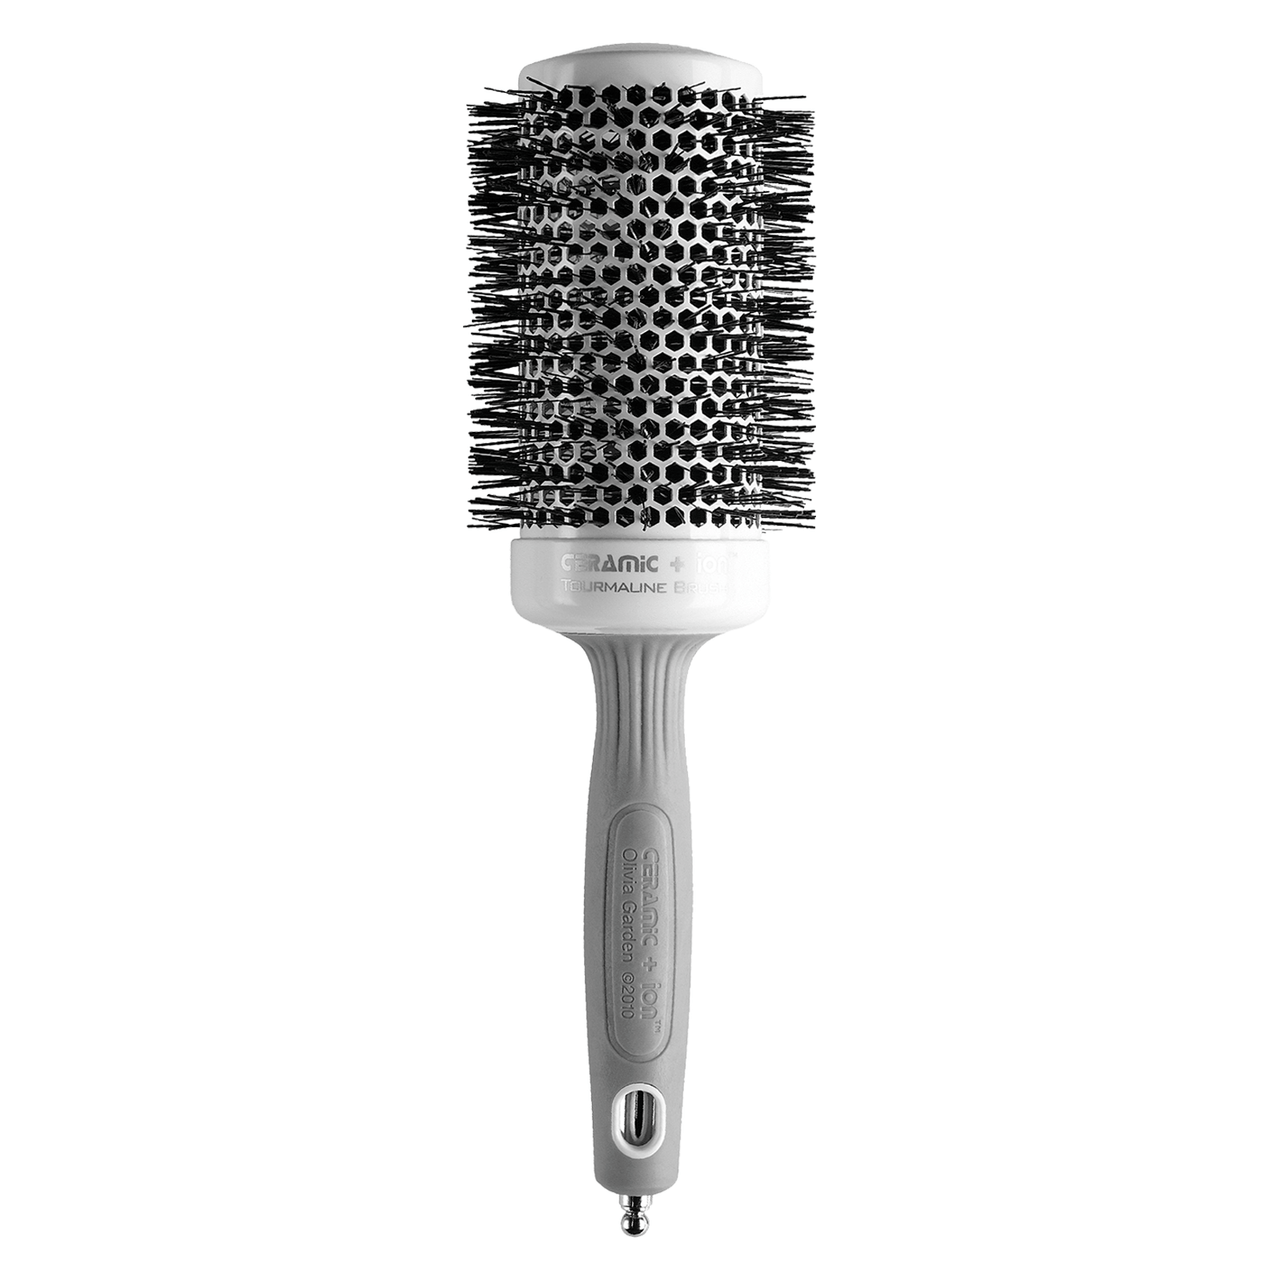 Olivia Garden Ceramic+Ion Large Thermal Brush - 2 1/8 inch 2 1/8 Inch